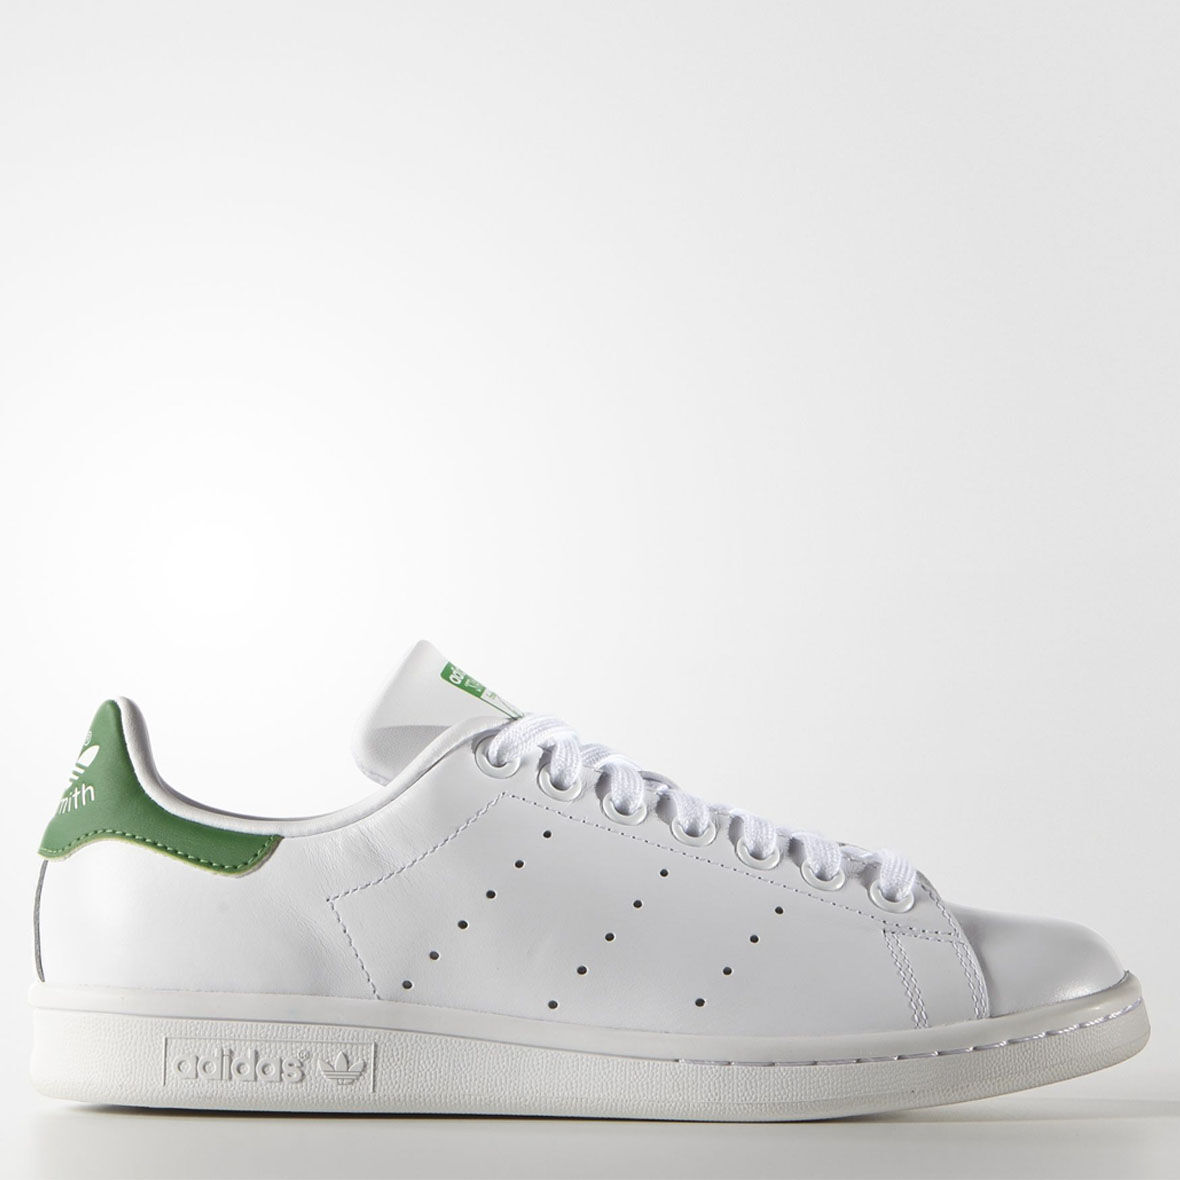 womens stan smith adidas shoes canada